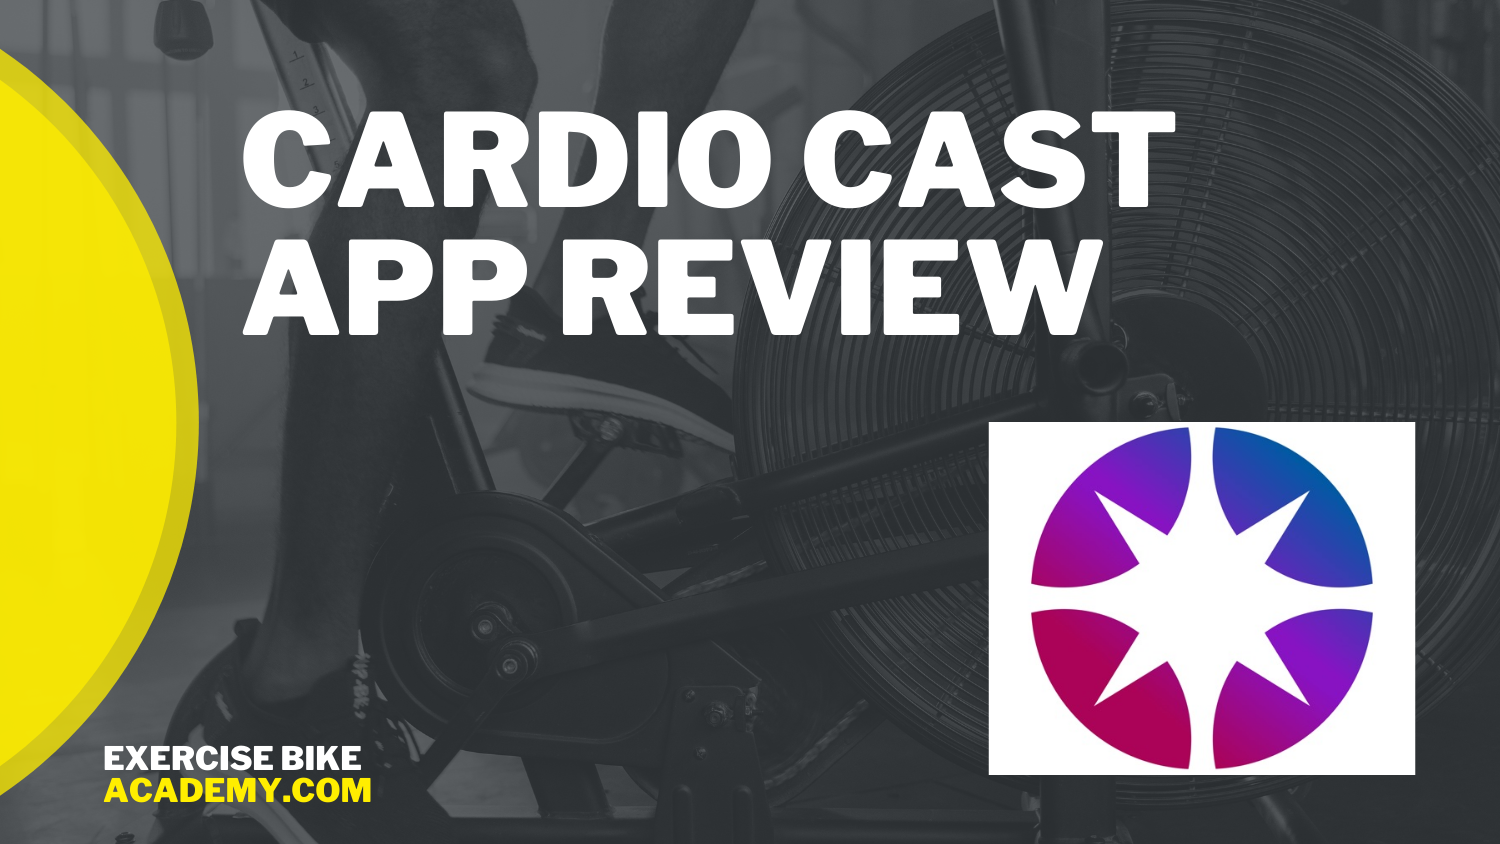 Cardio Cast App Review: The Definitive Guide to Using the App￼